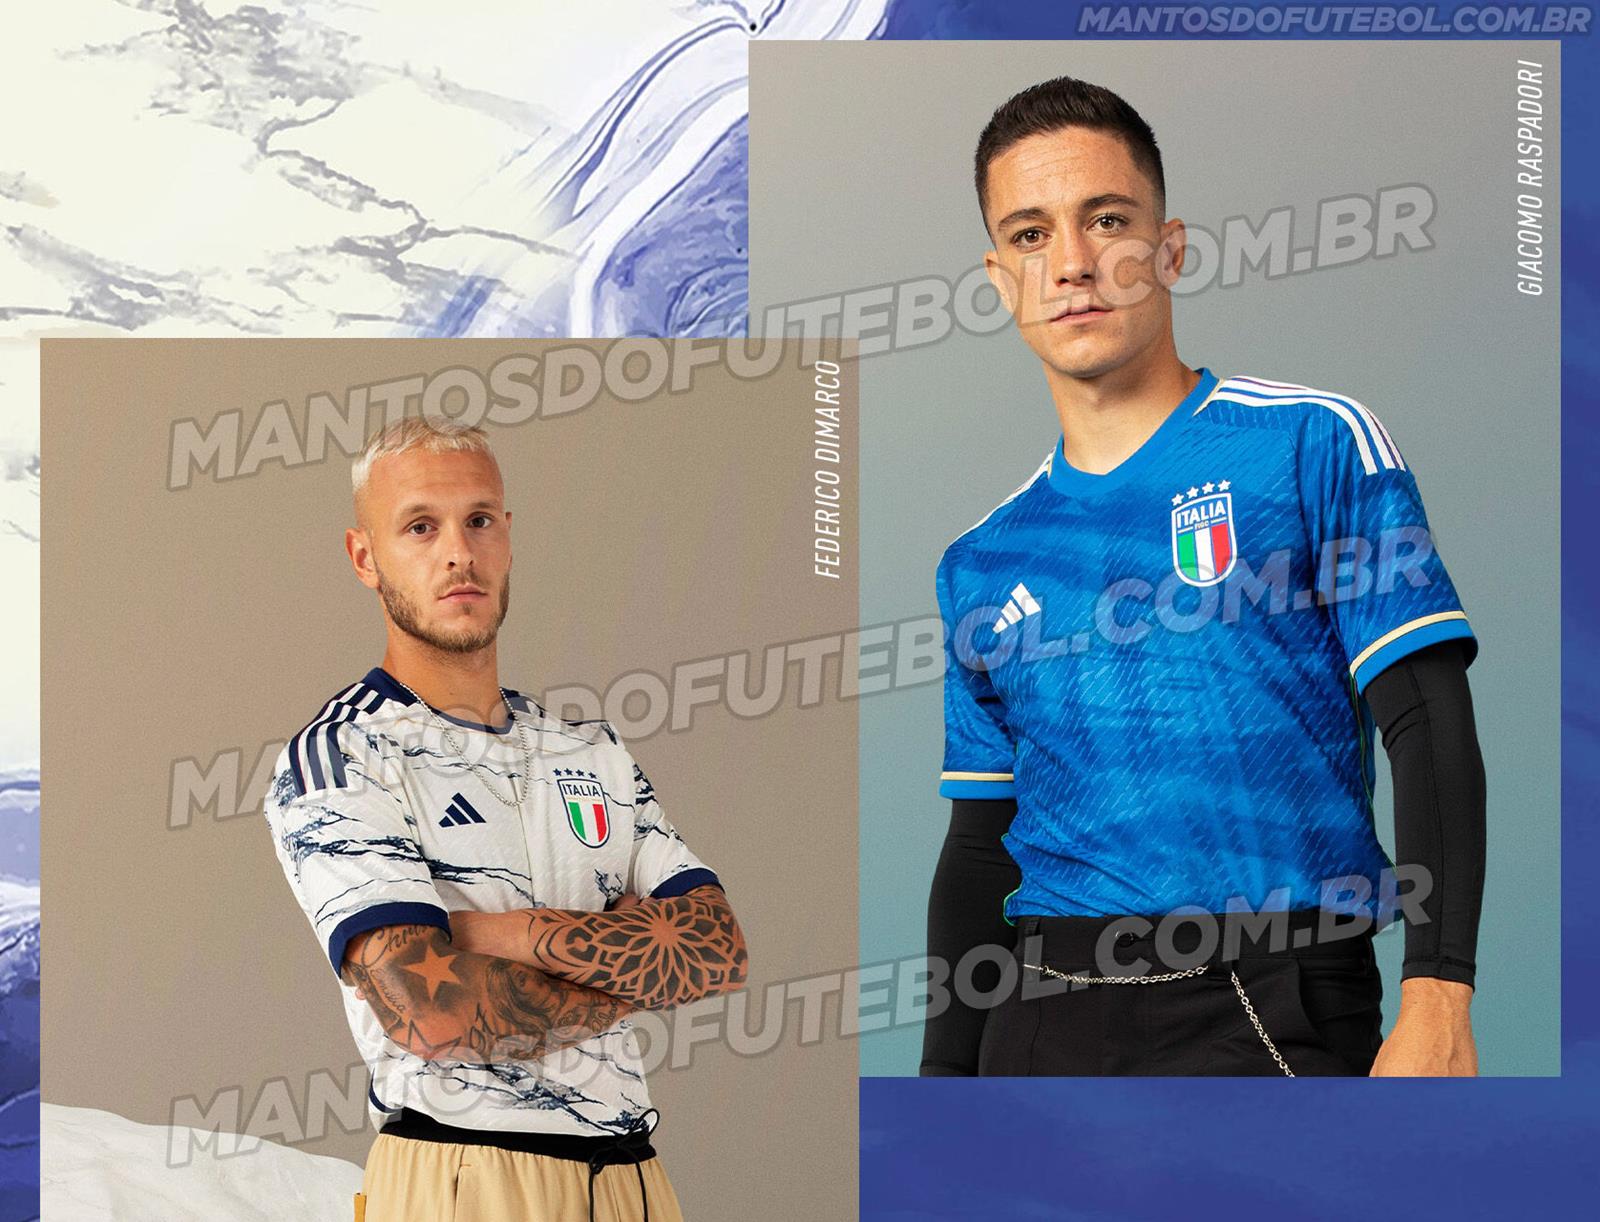 Adidas to Manufacture Italian National Team Kits Starting in 2023 –  SportsLogos.Net News